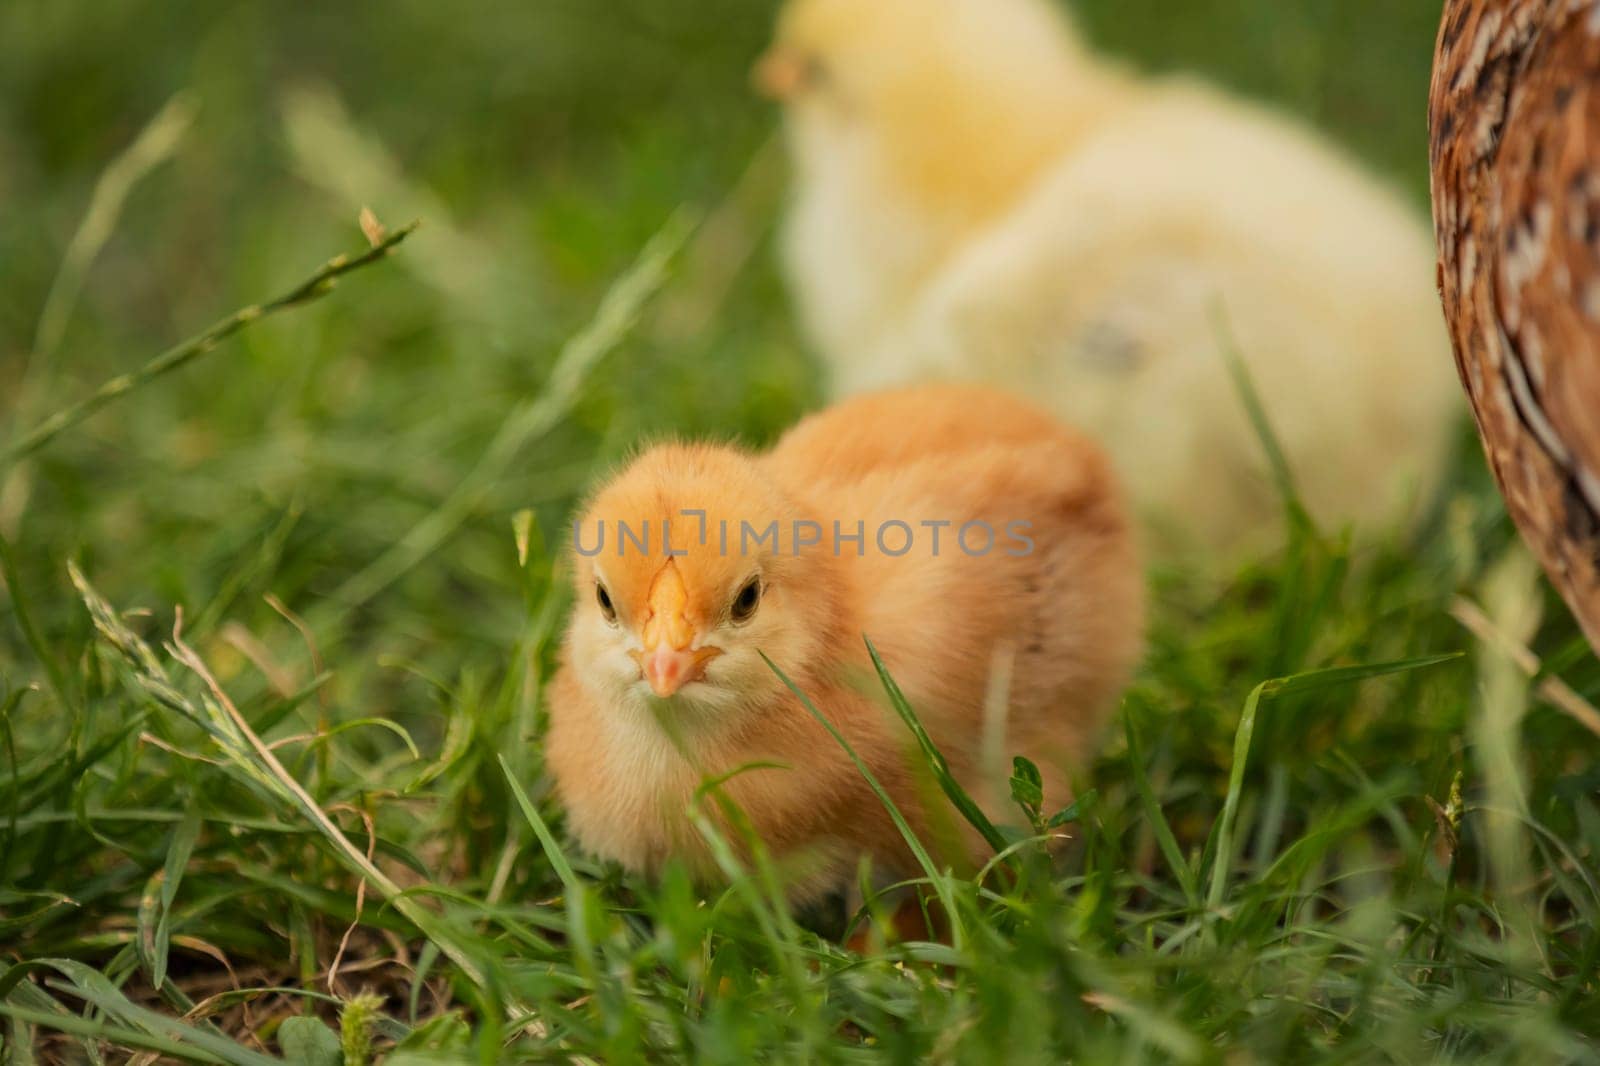 yellow little chickens walk on the grass, close-up